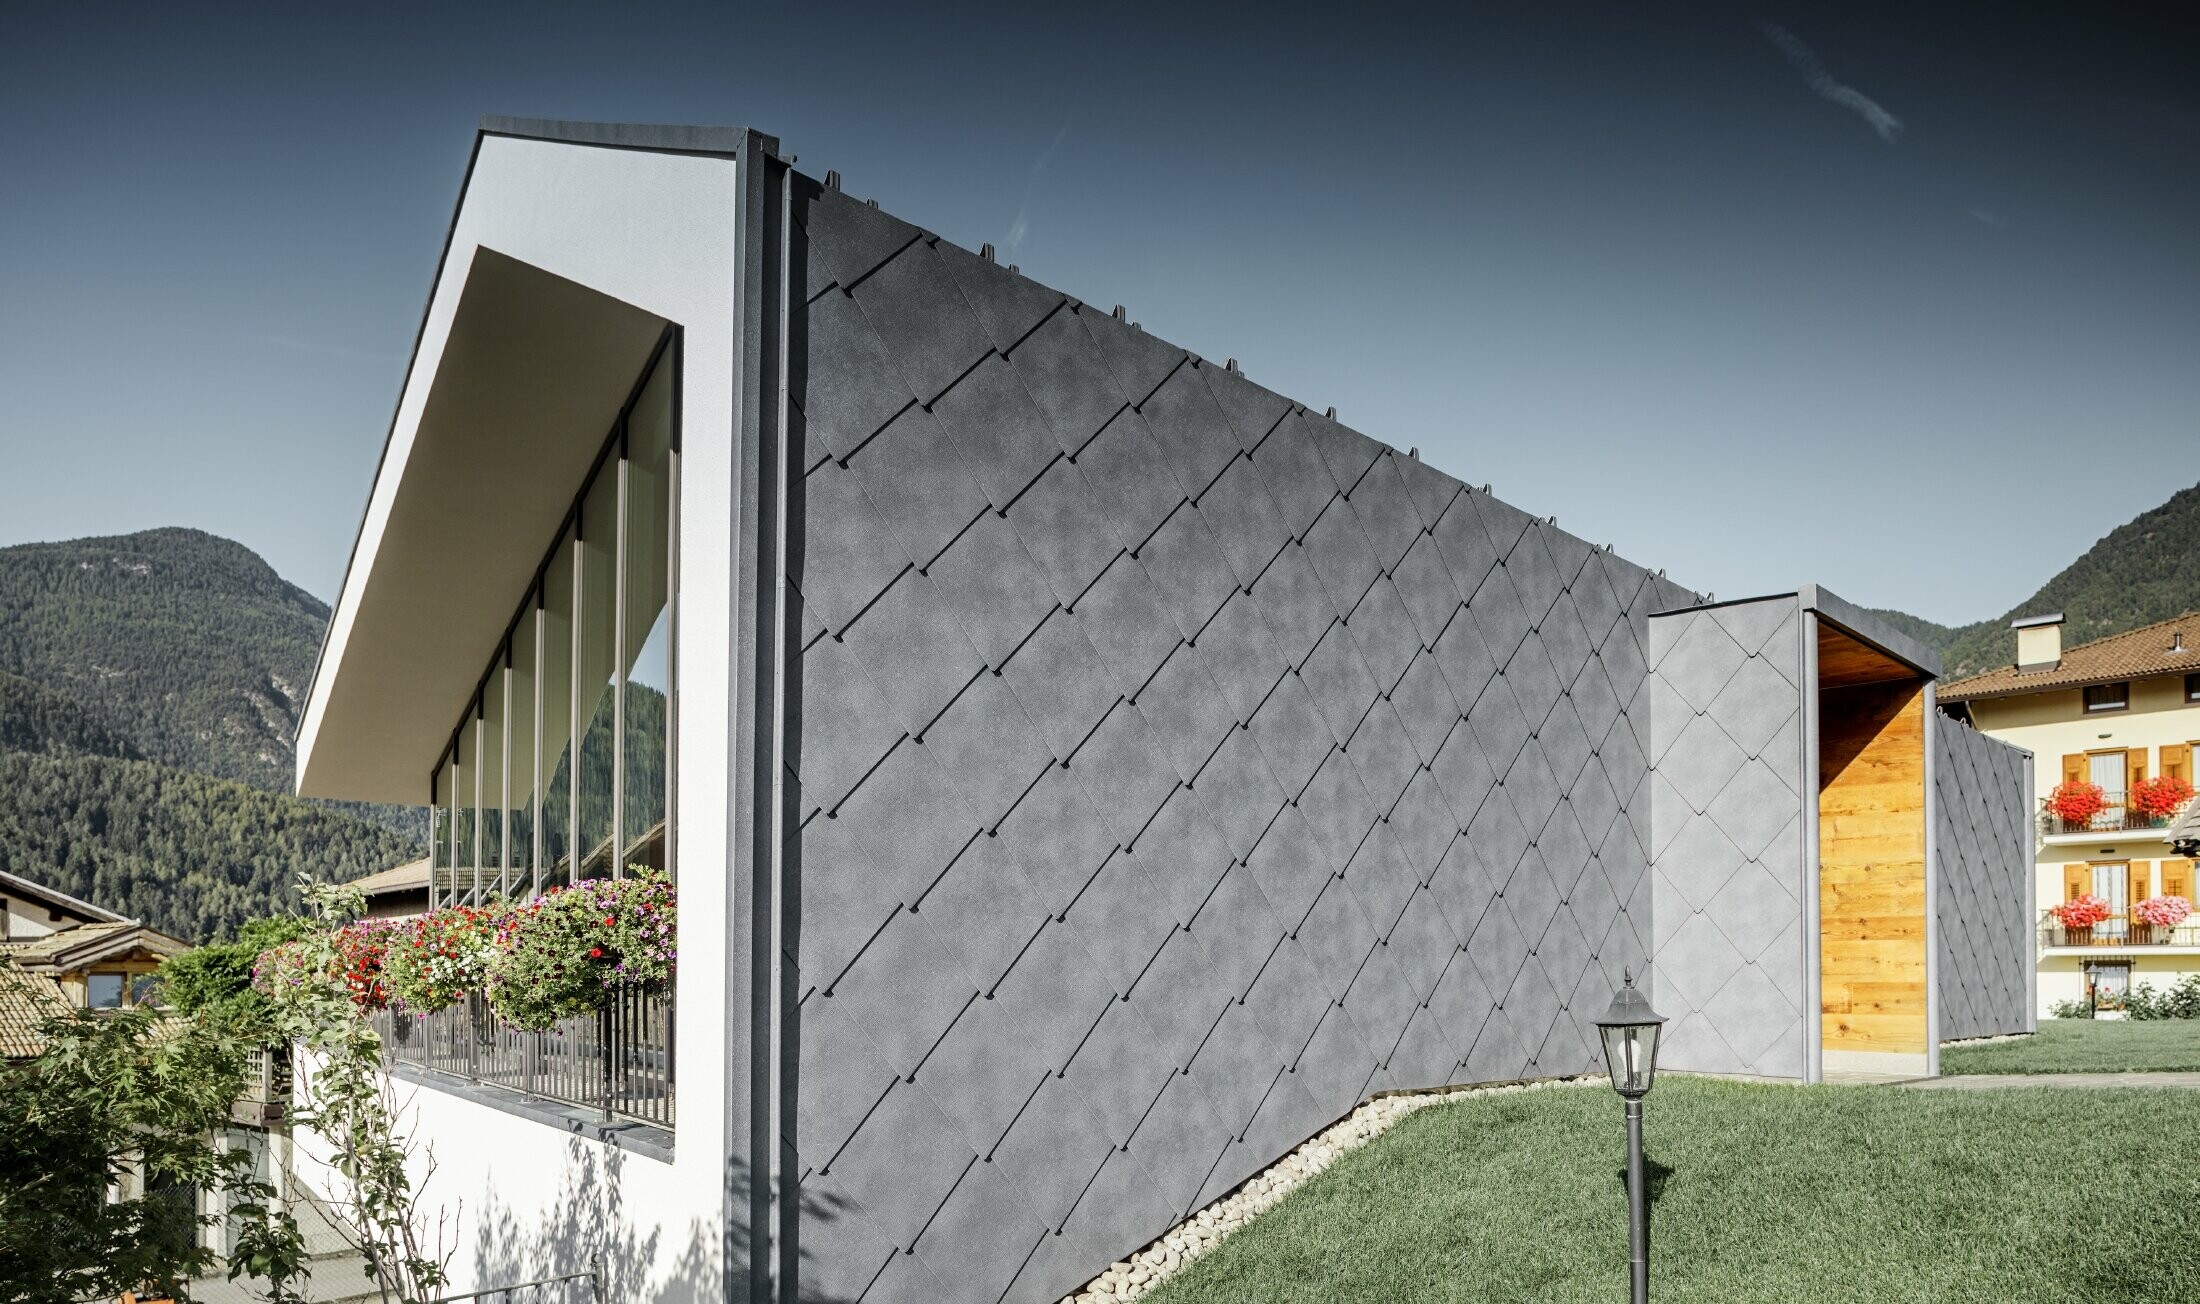 Modern hairdressing salon in Livo covered with the PREFA 44 rhomboid roof and façade tile in stone grey